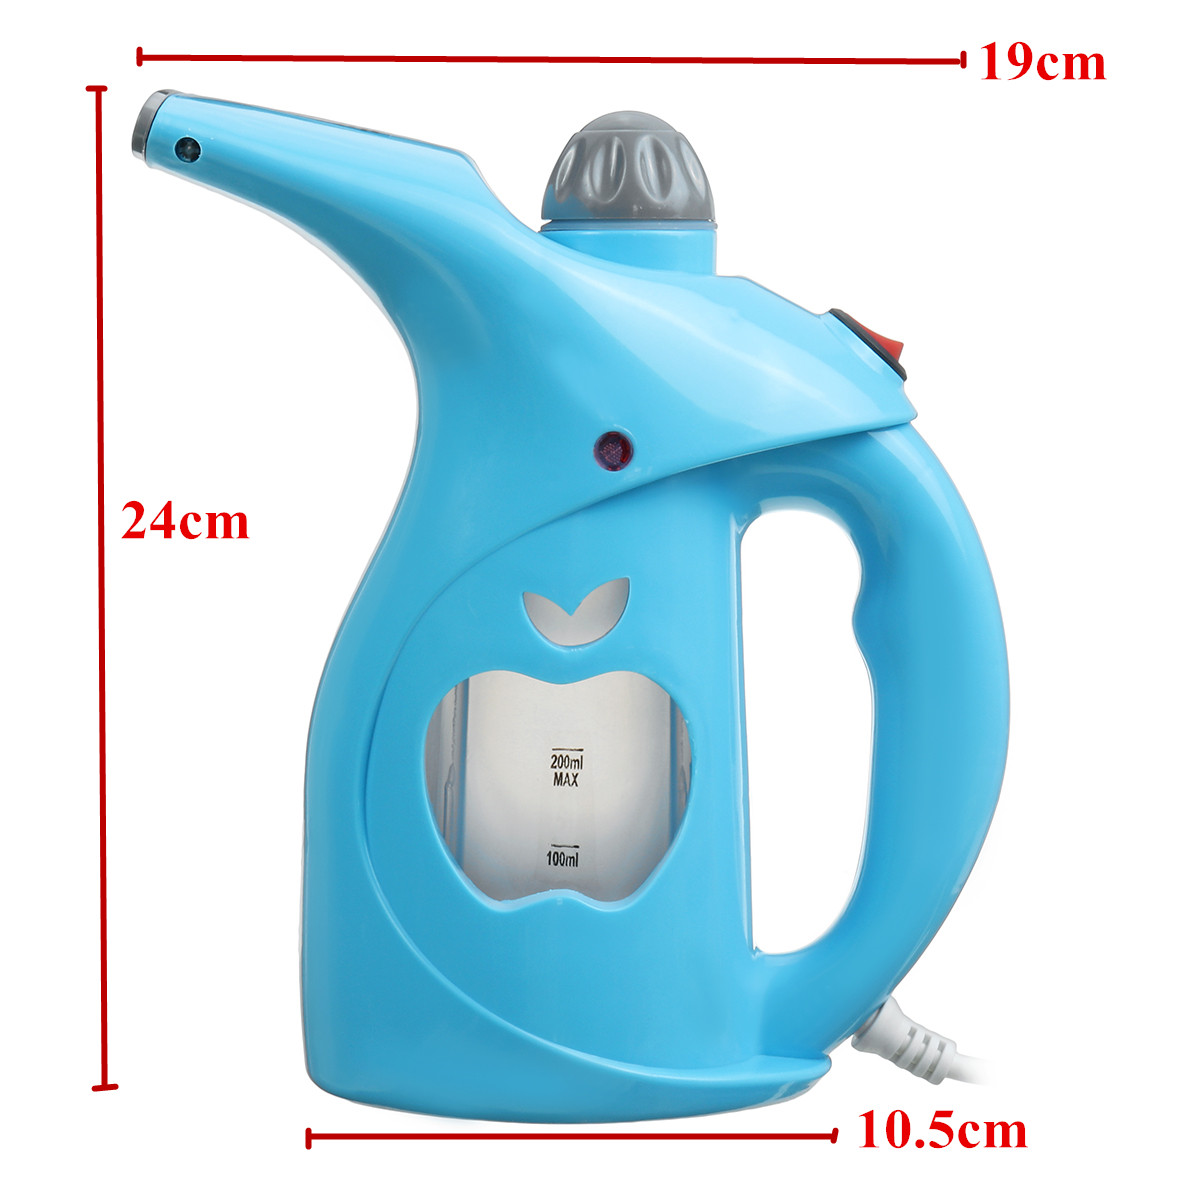 220V-3-in-1-Portable-Electric-Steam-Iron-Handheld-Clothes-Steamer-Brush-200ML-1626106-9